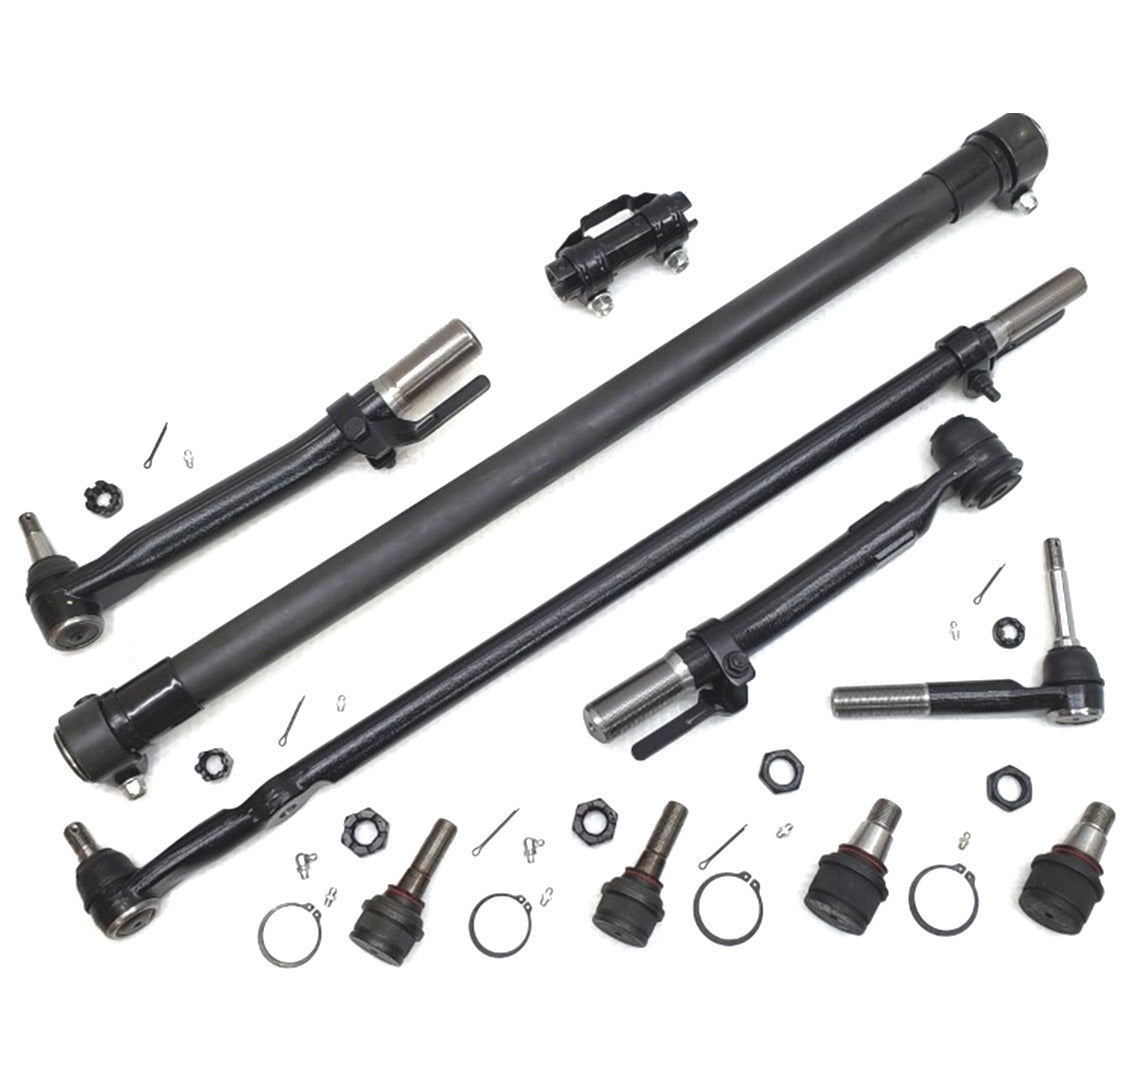 Ford F250 F350 4x4 2011-2016 Lifetime Ball Joints Tie Rods Drag Link Sleeves Kit